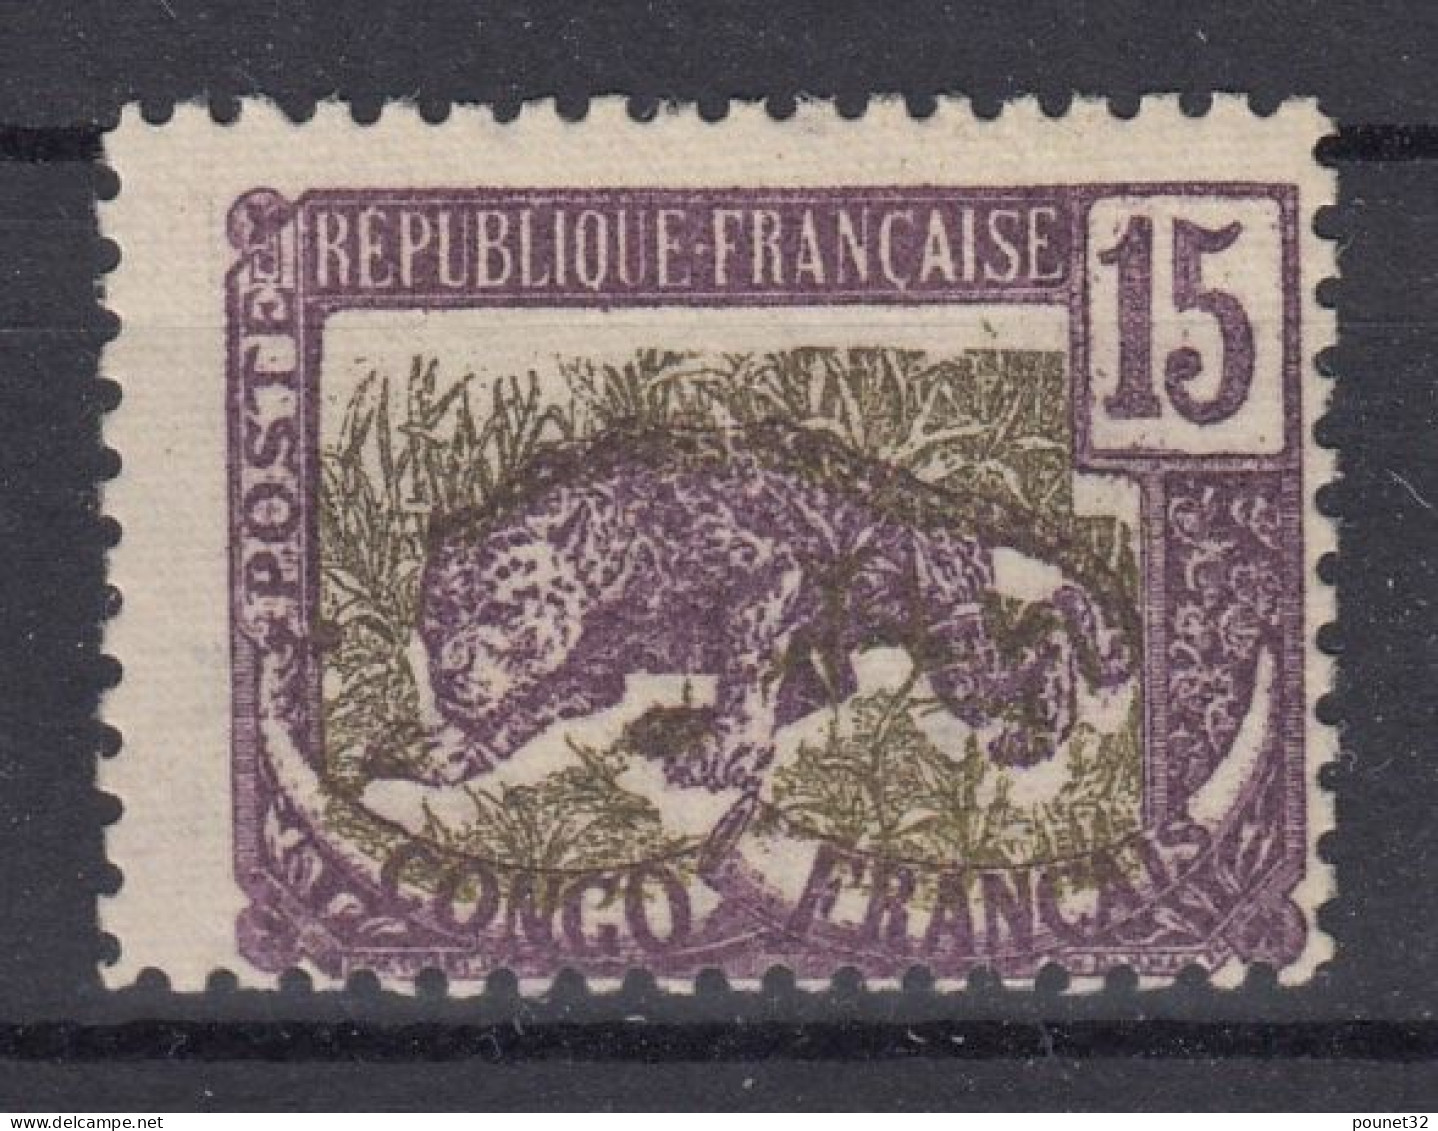 CONGO N° 32b CORNE TRONQUEE & CENTRE DECALE NEUF * GOMME TRACE DE CHARNIERE - Neufs